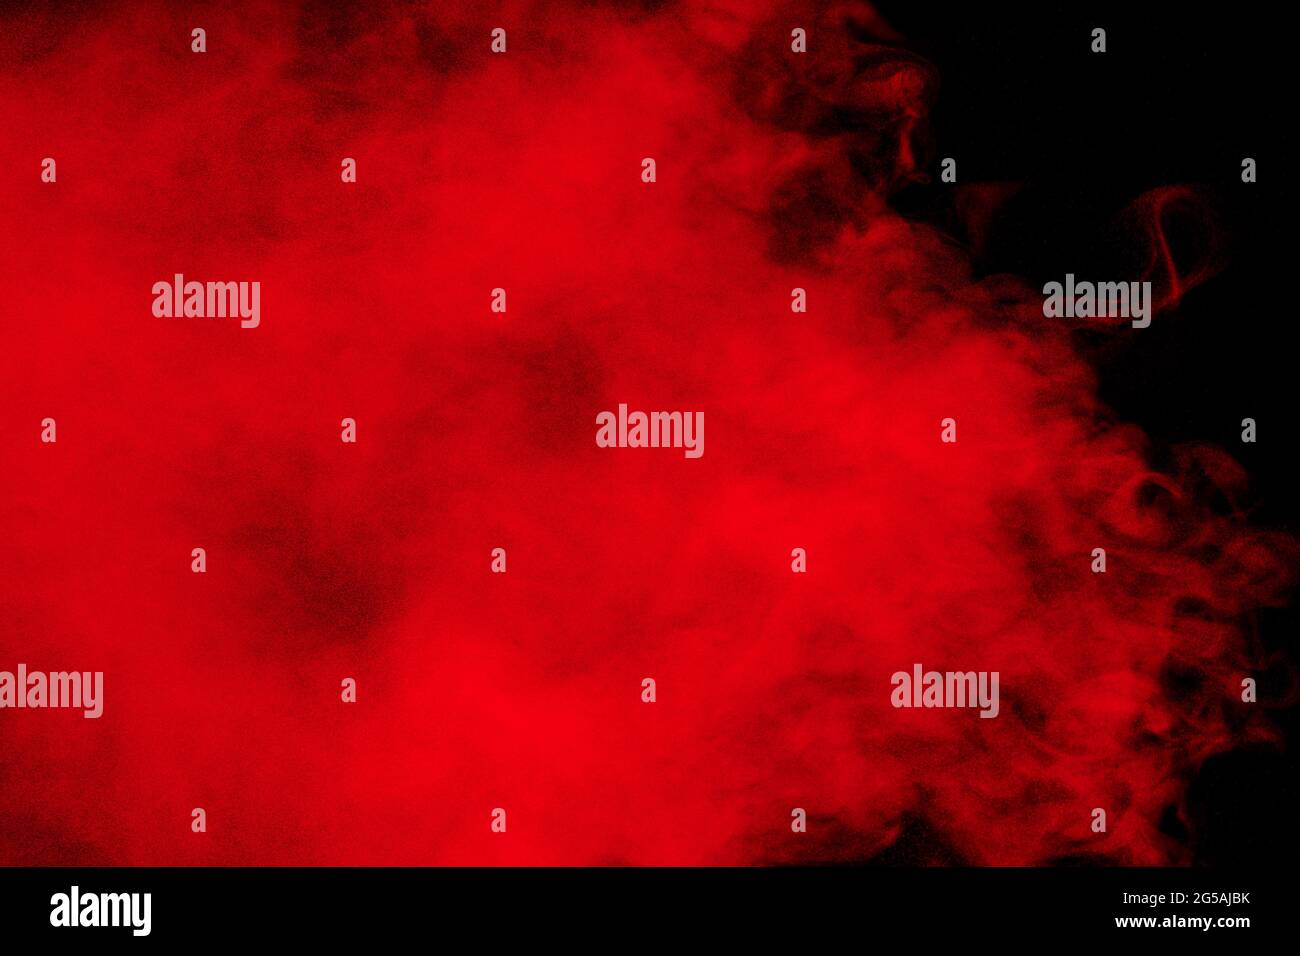 Red particles explosion on black background.Freeze motion of red dust splash. Stock Photo